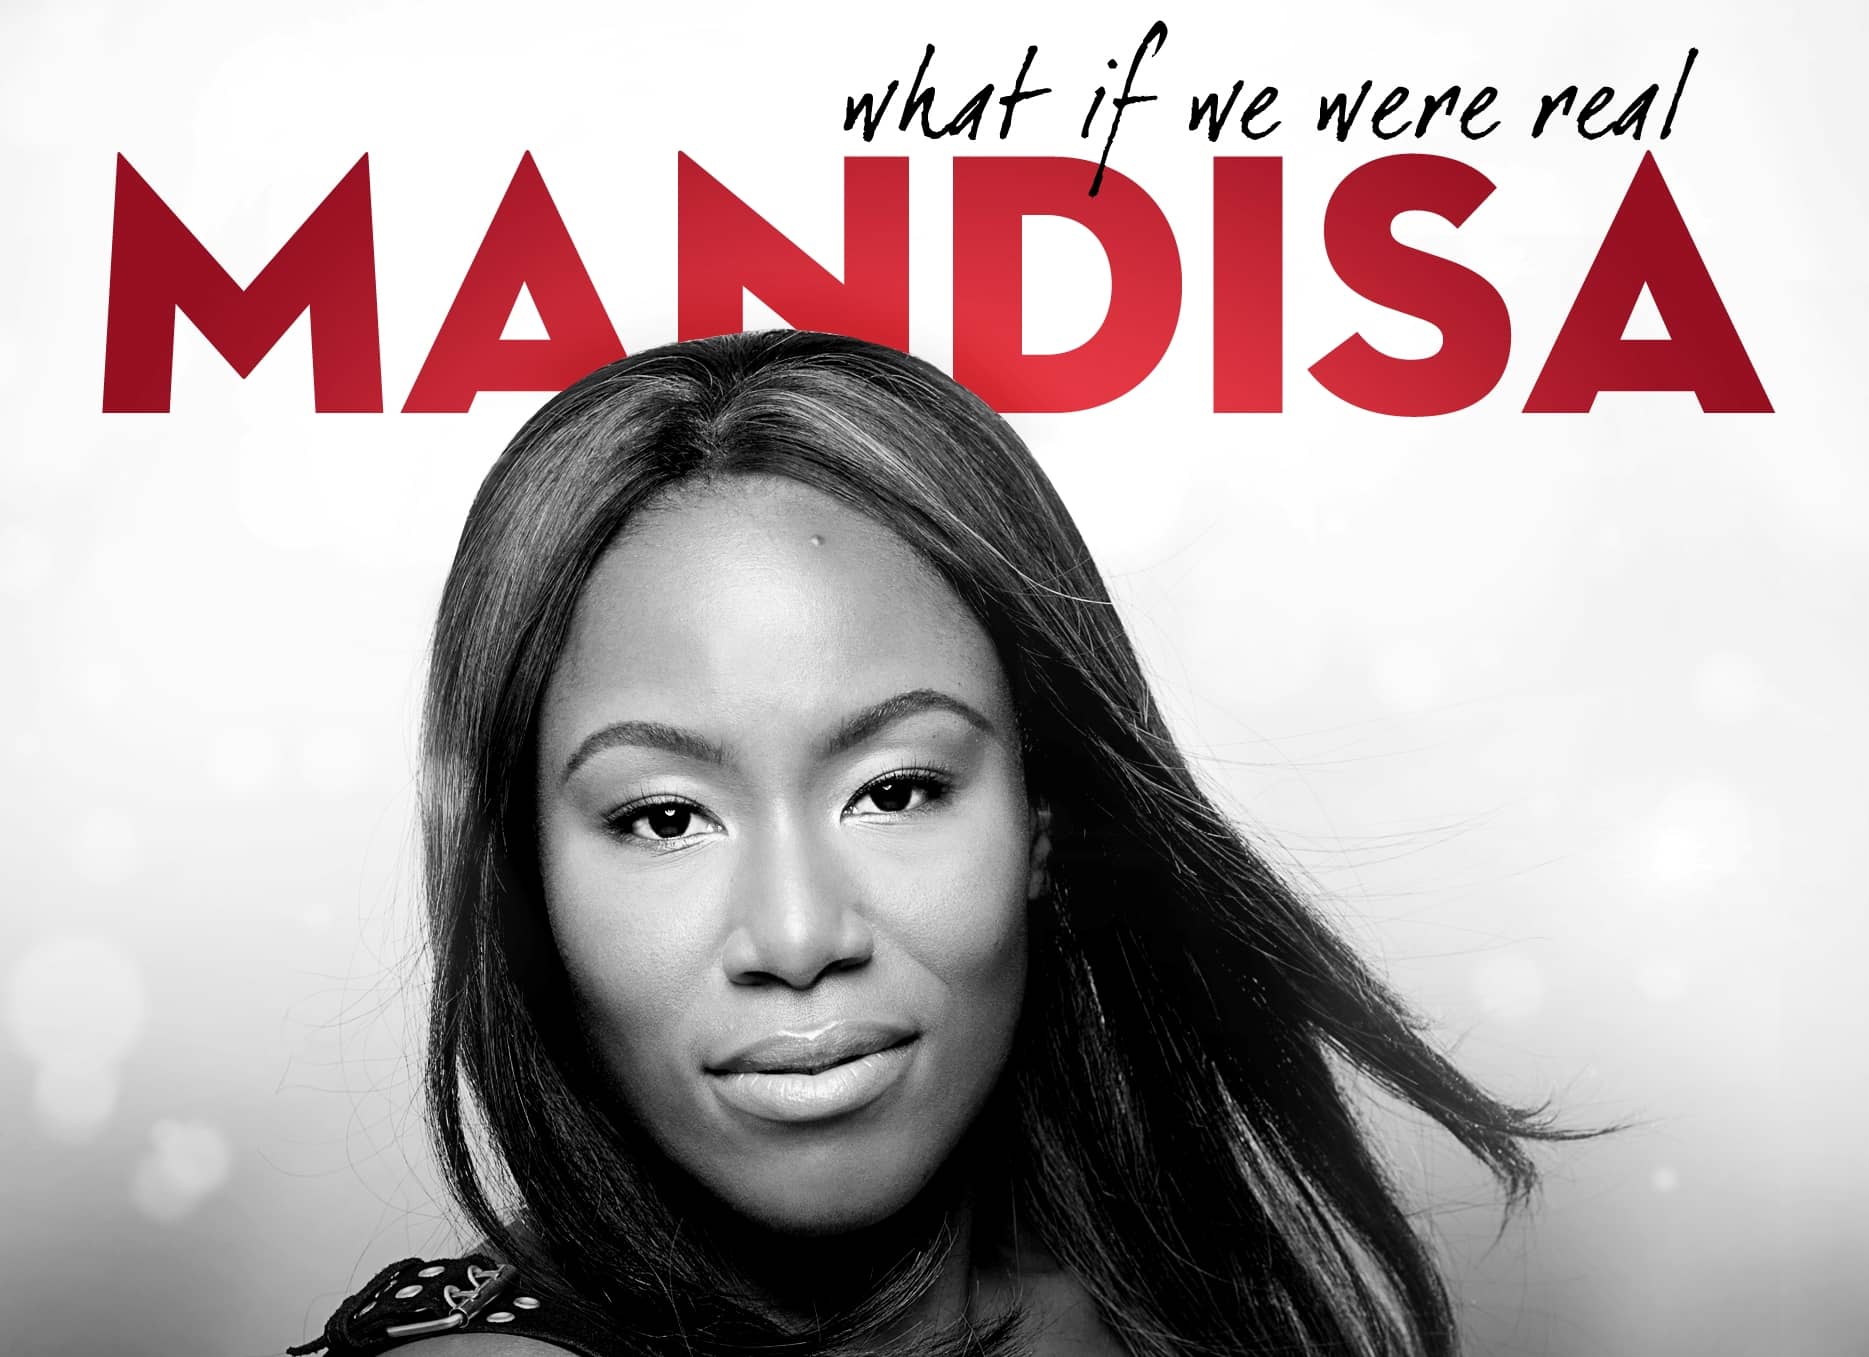 Mandisa Getting Real About Losing Weight